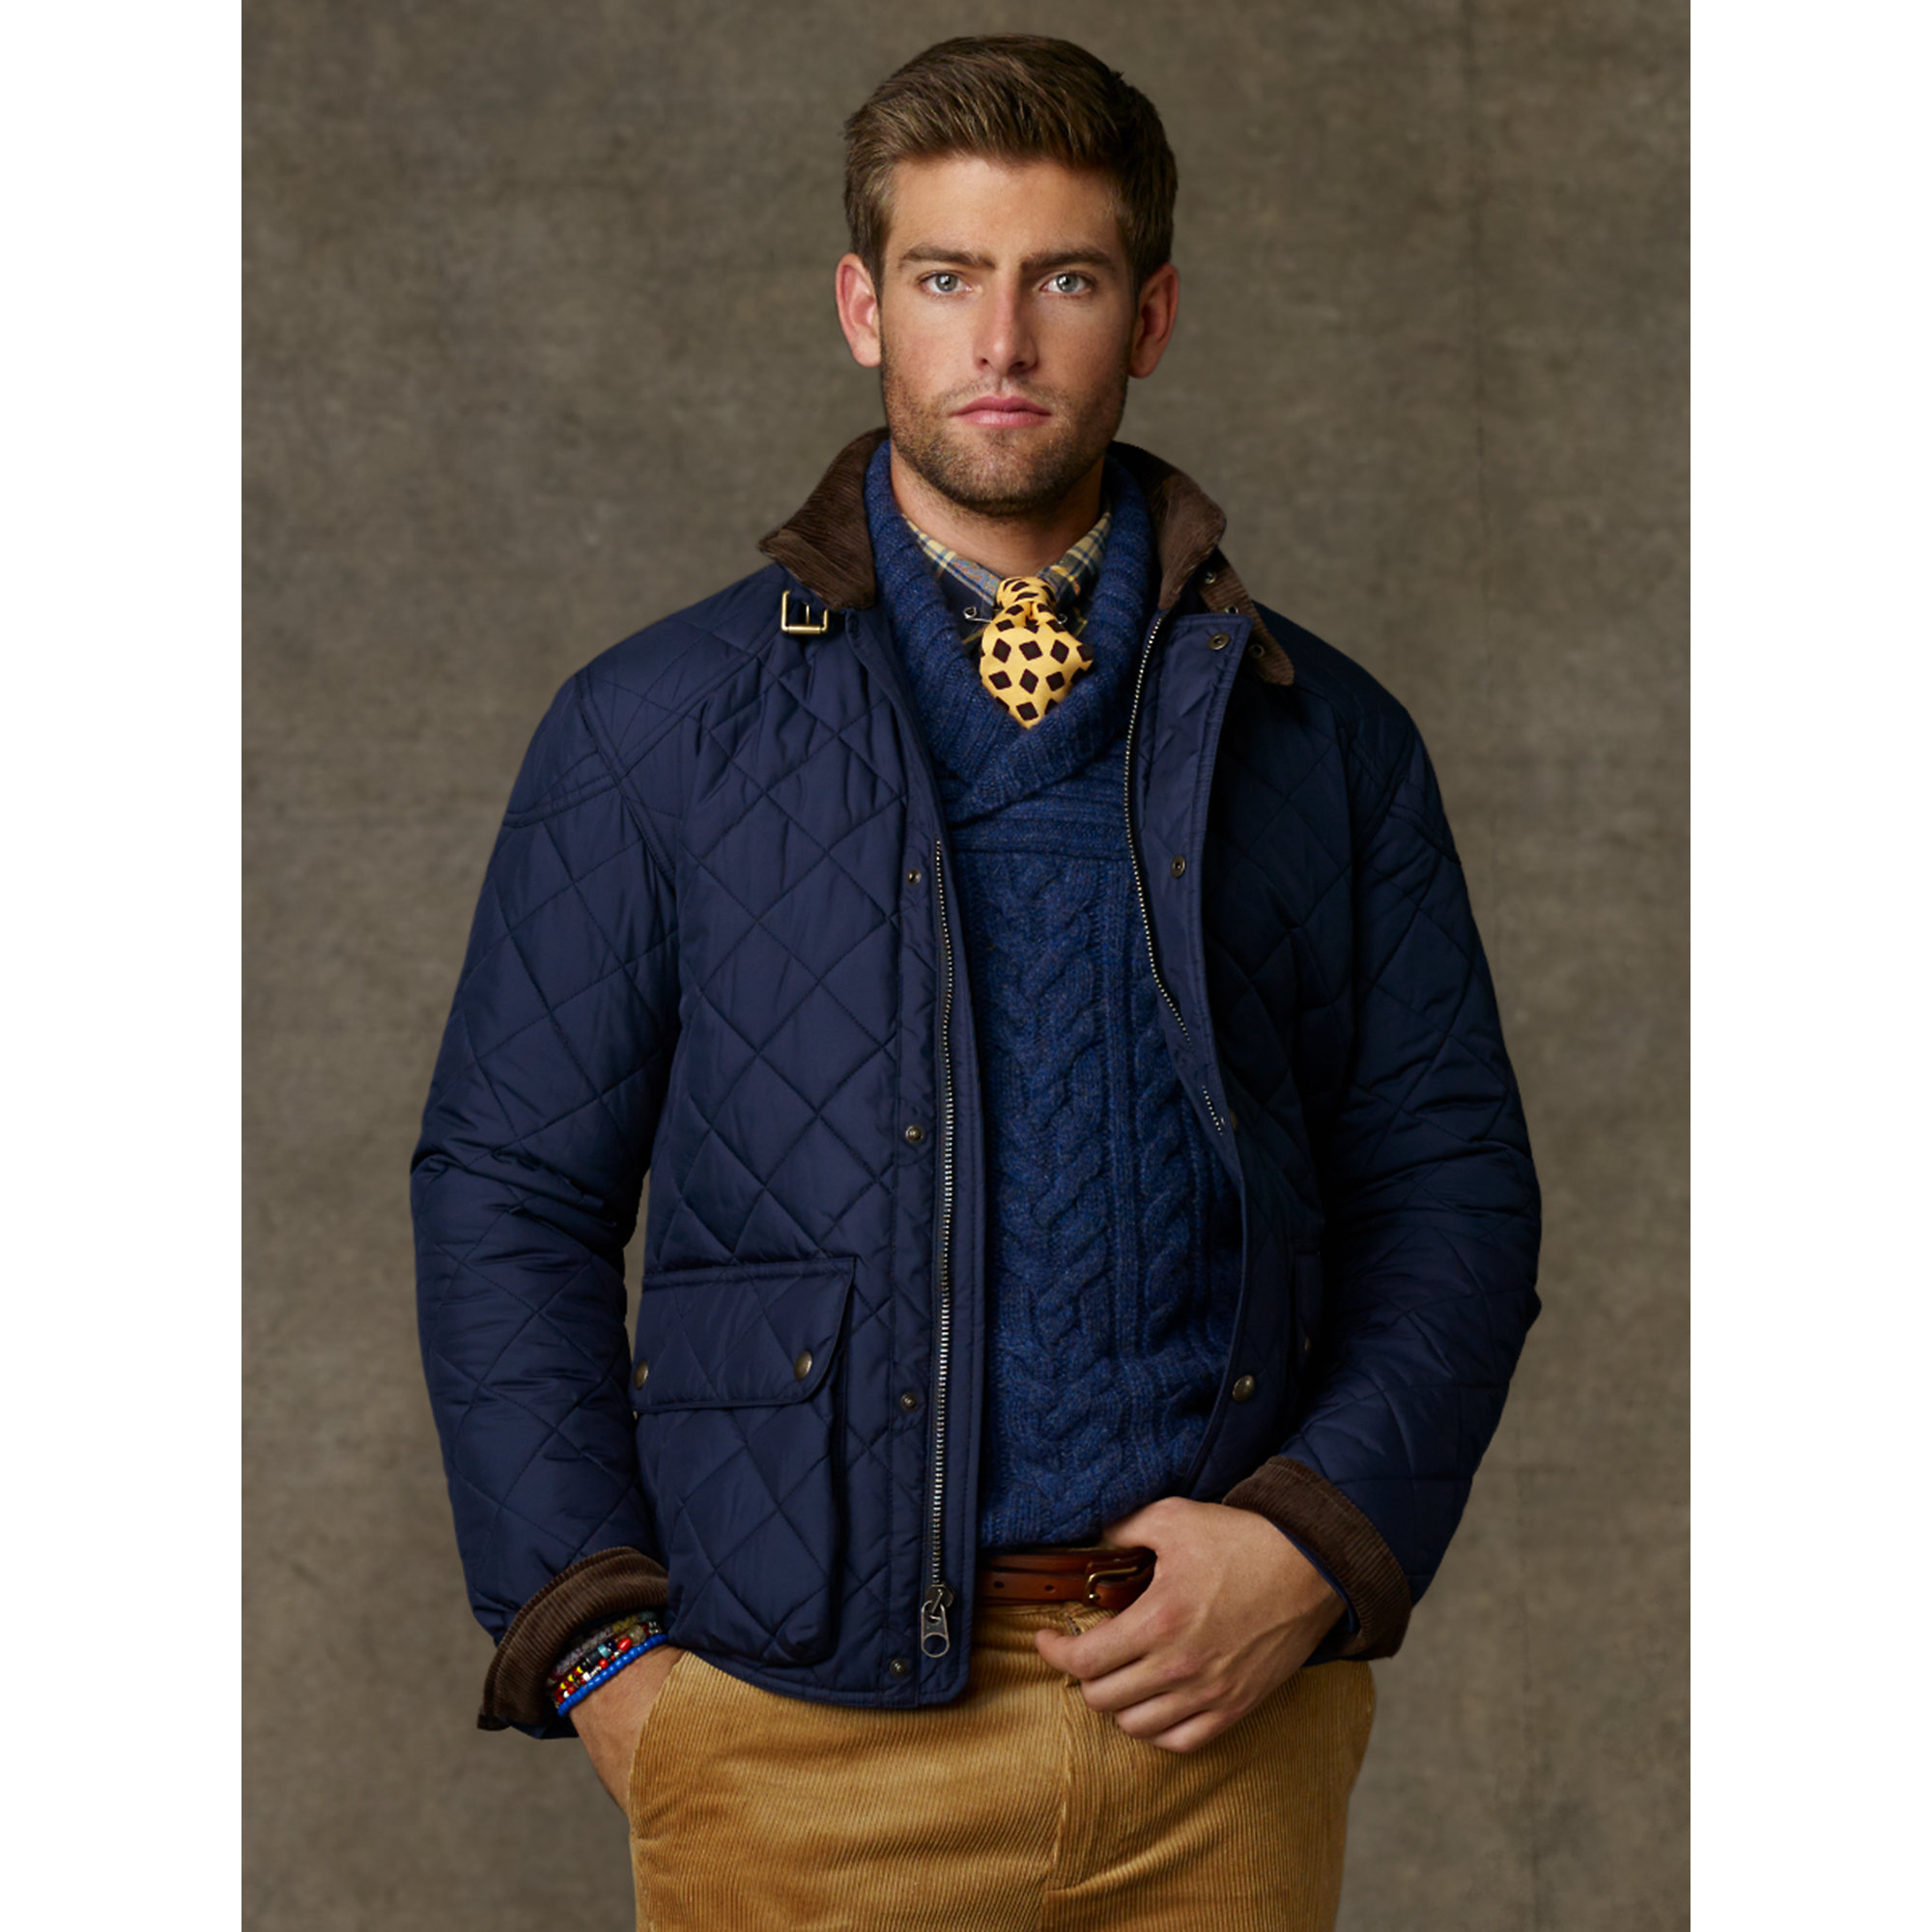 Polo Ralph Lauren Cadwell Quilted Bomber Jacket in Blue for Men - Lyst